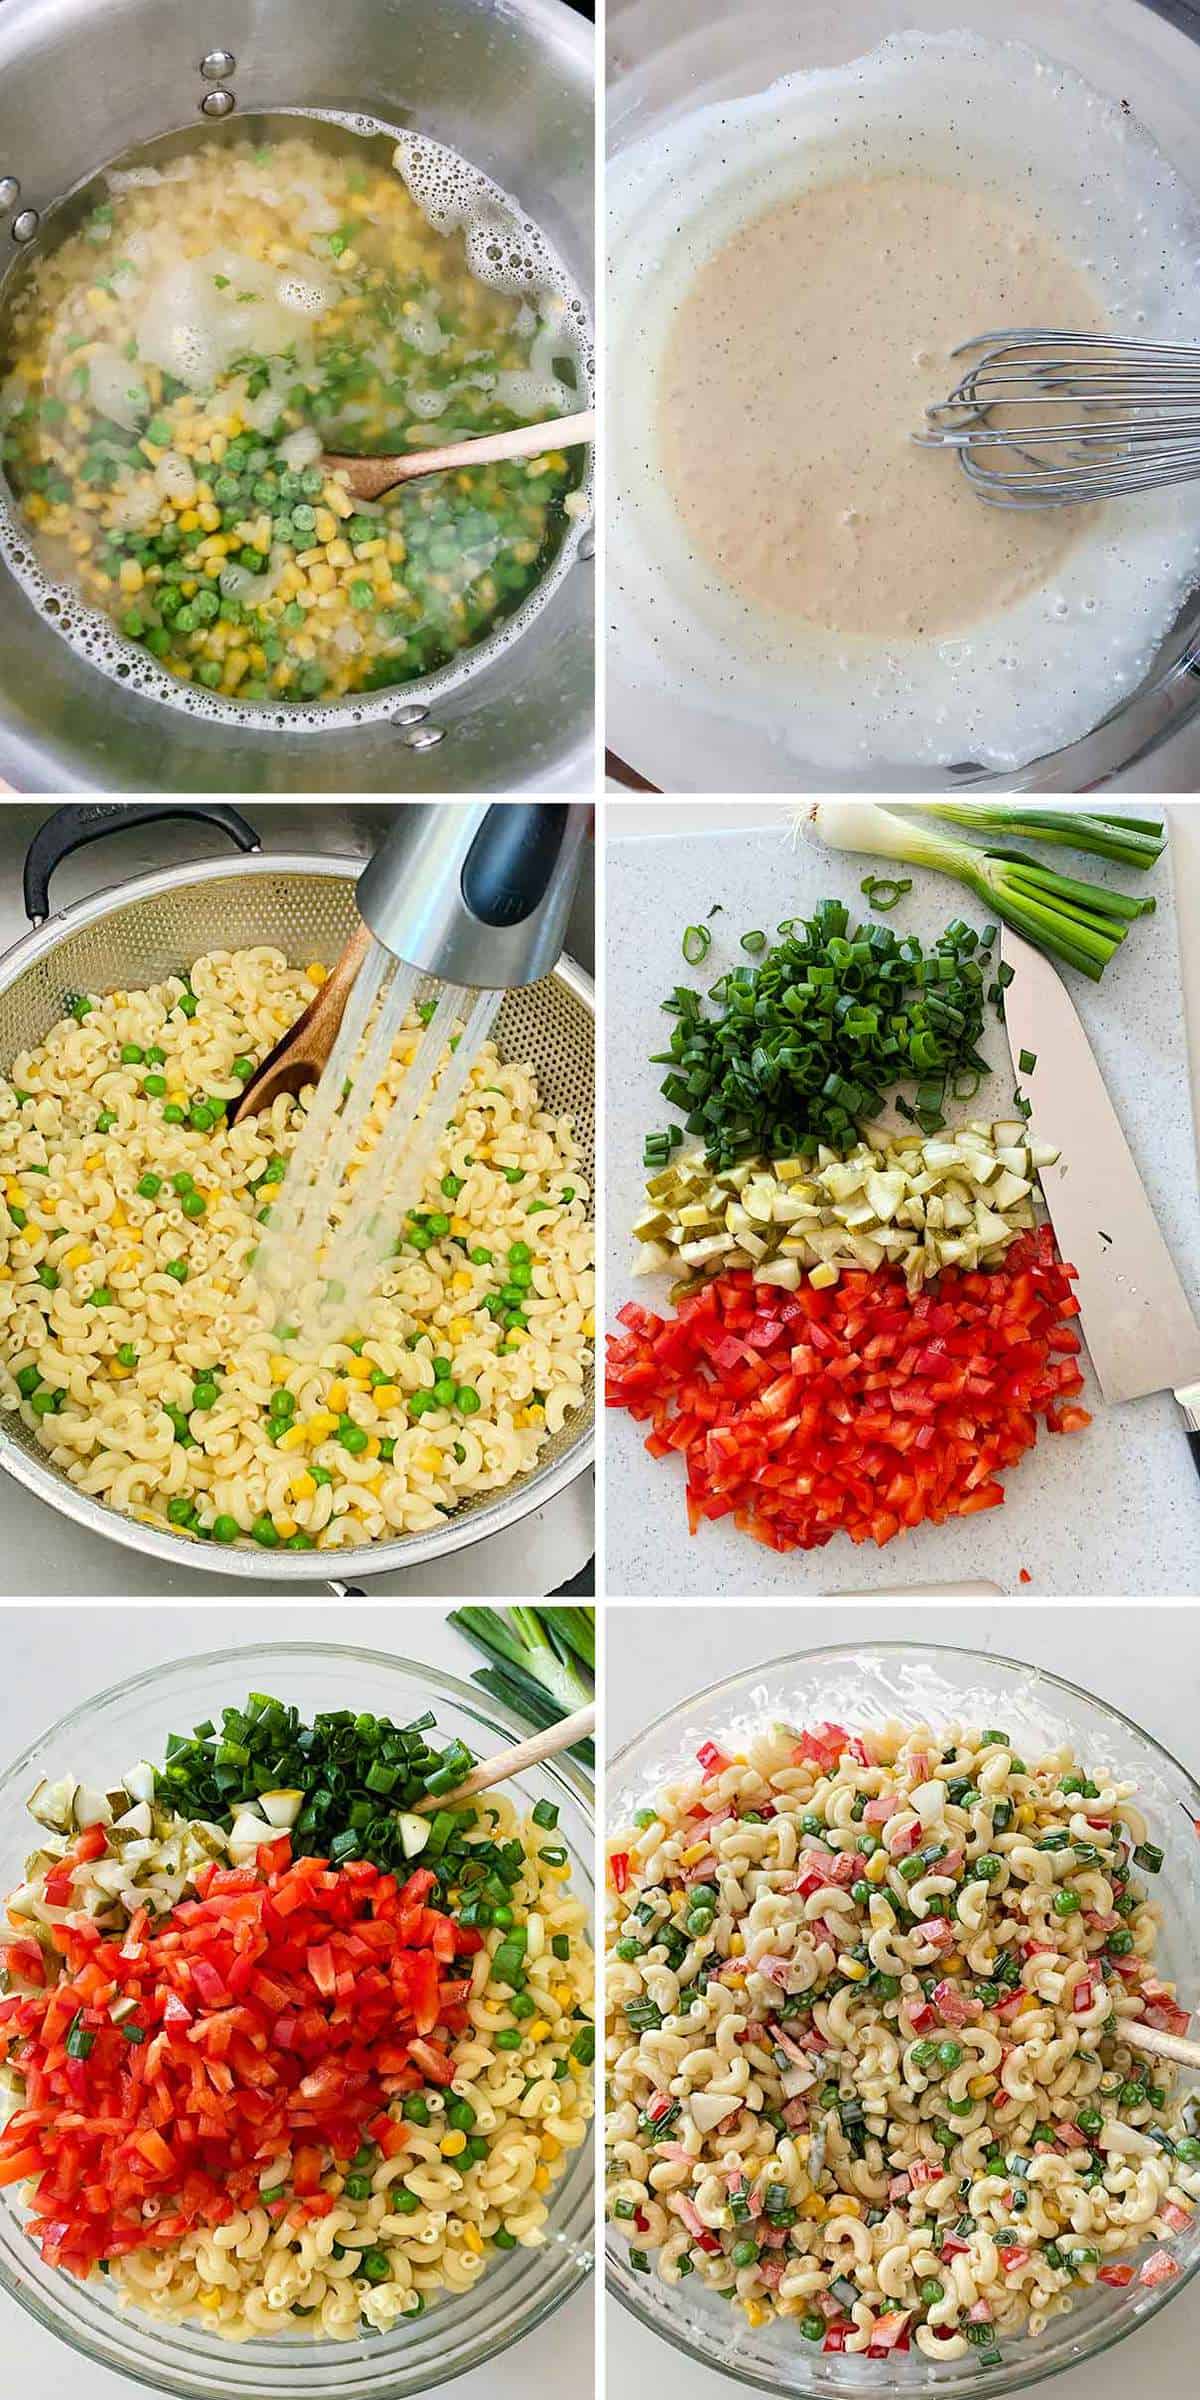 Process collage showing how to make macaroni salad with vegetables.